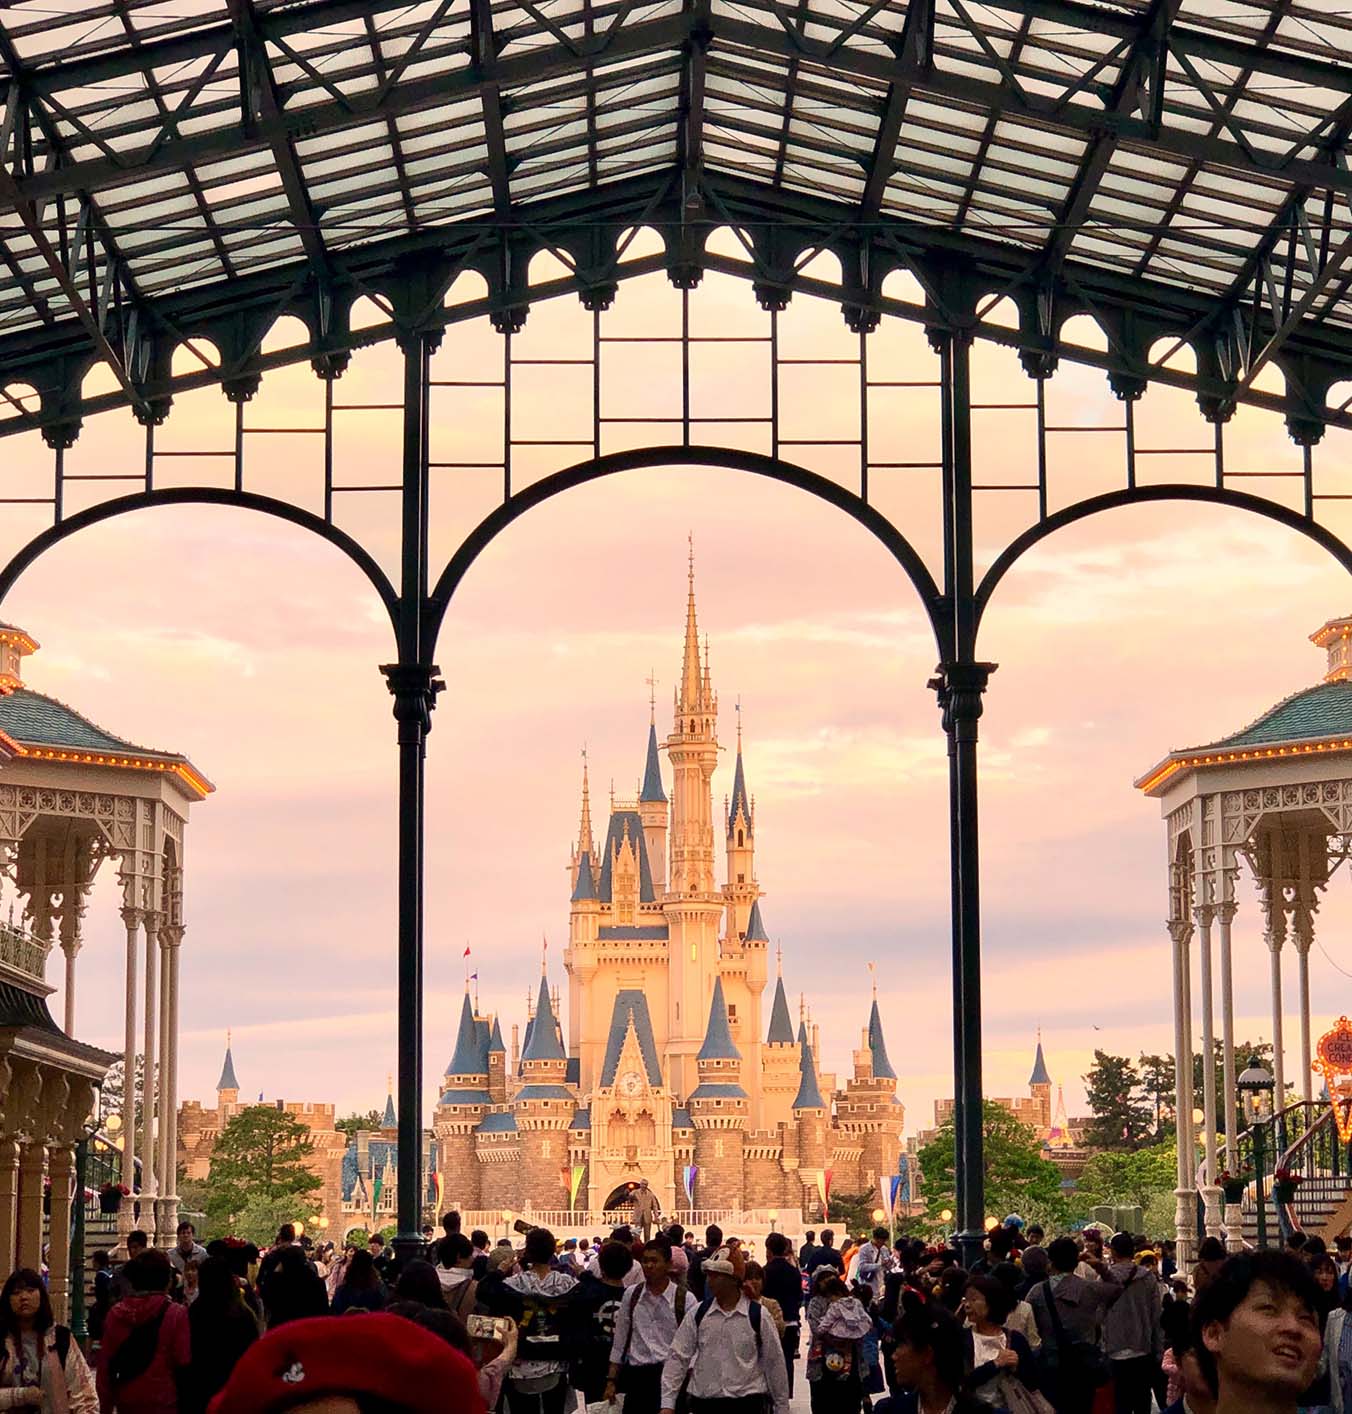 Going to Tokyo Disneyland alone taught me solo travel is great